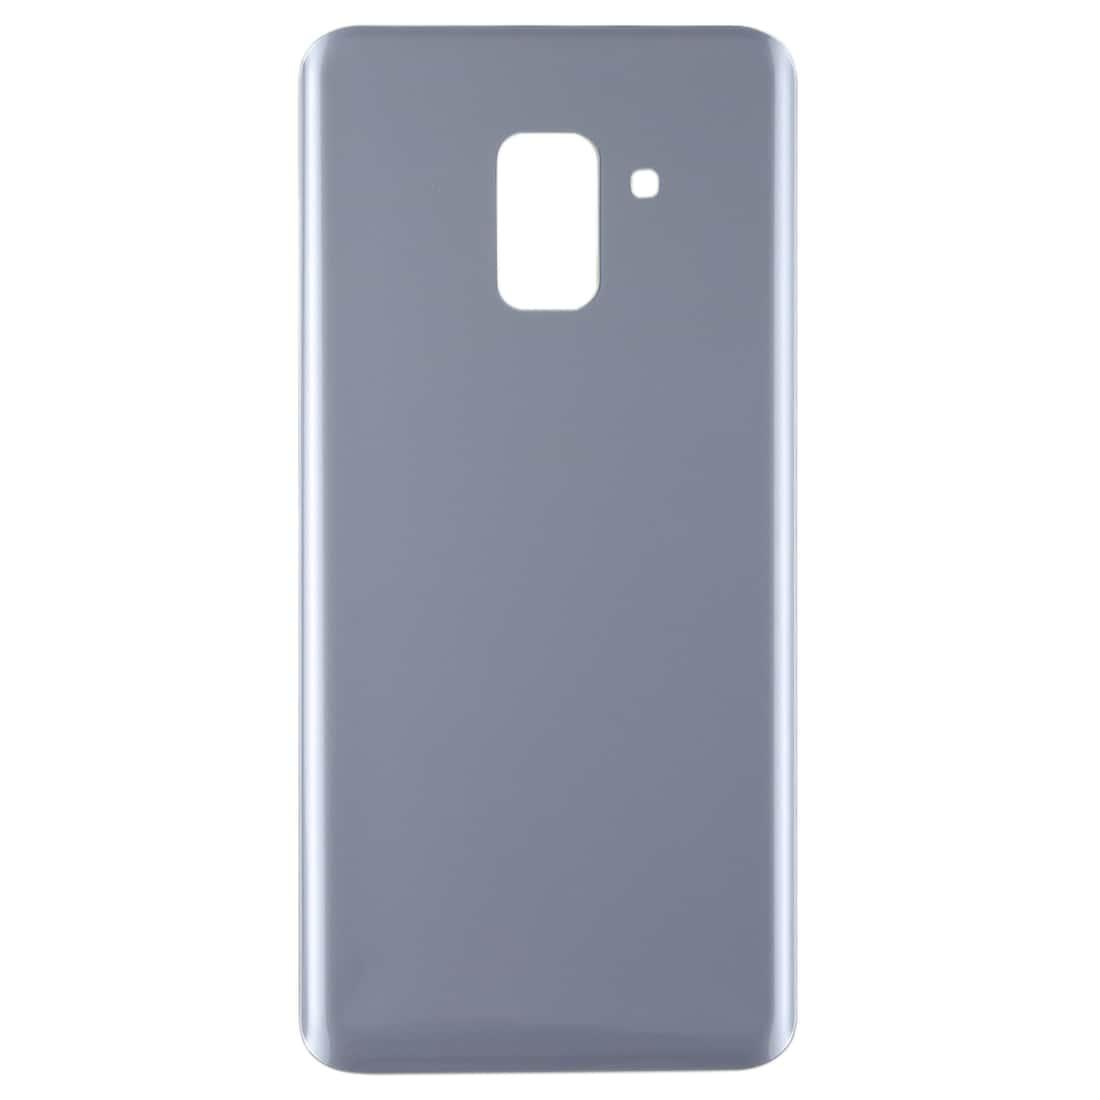 Back Glass Panel for  Samsung Galaxy A8 Plus 2018 A730 Grey